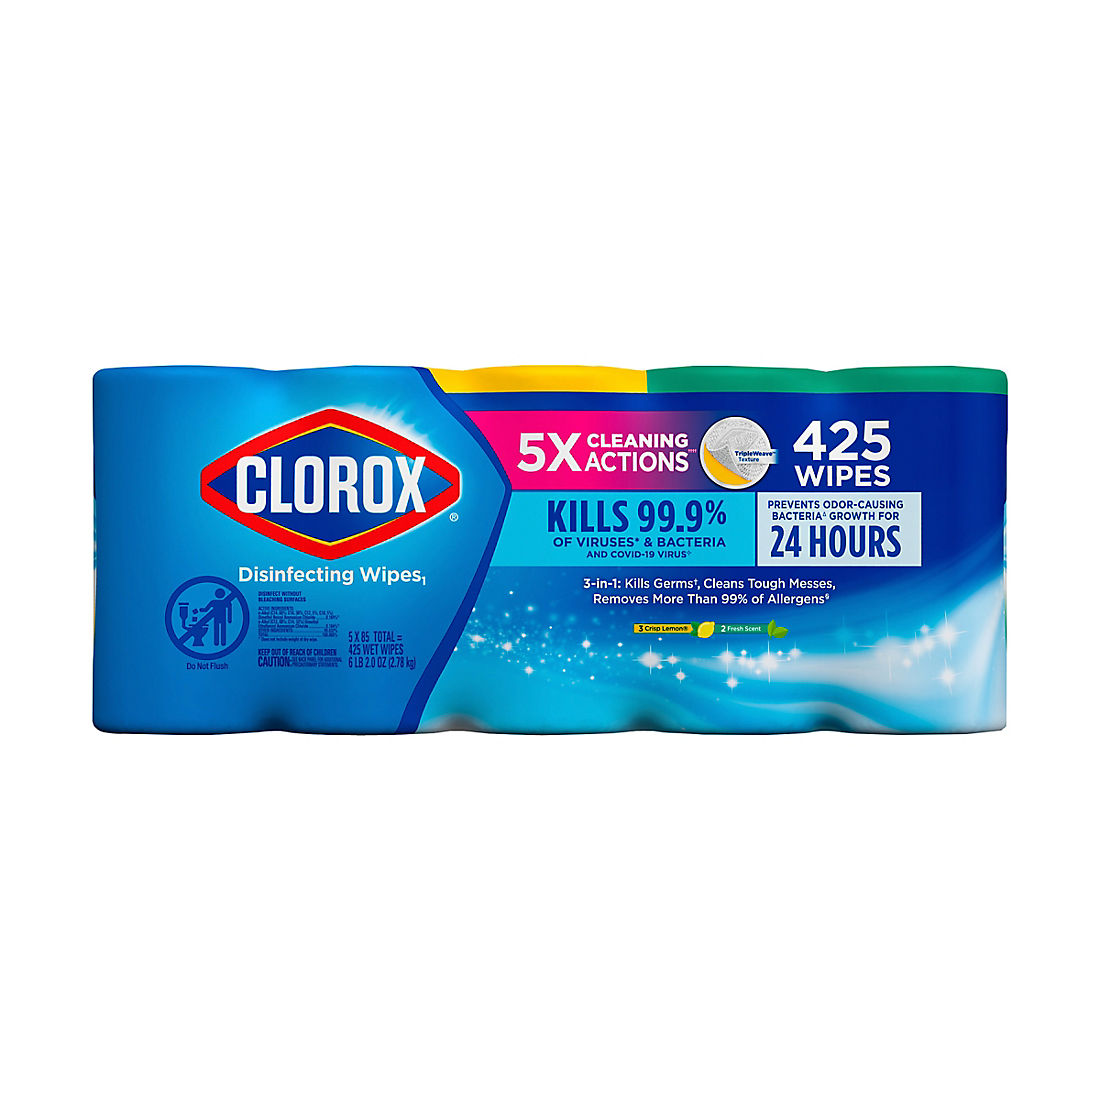 Clorox Disinfecting Wipes 5 Pack Bj